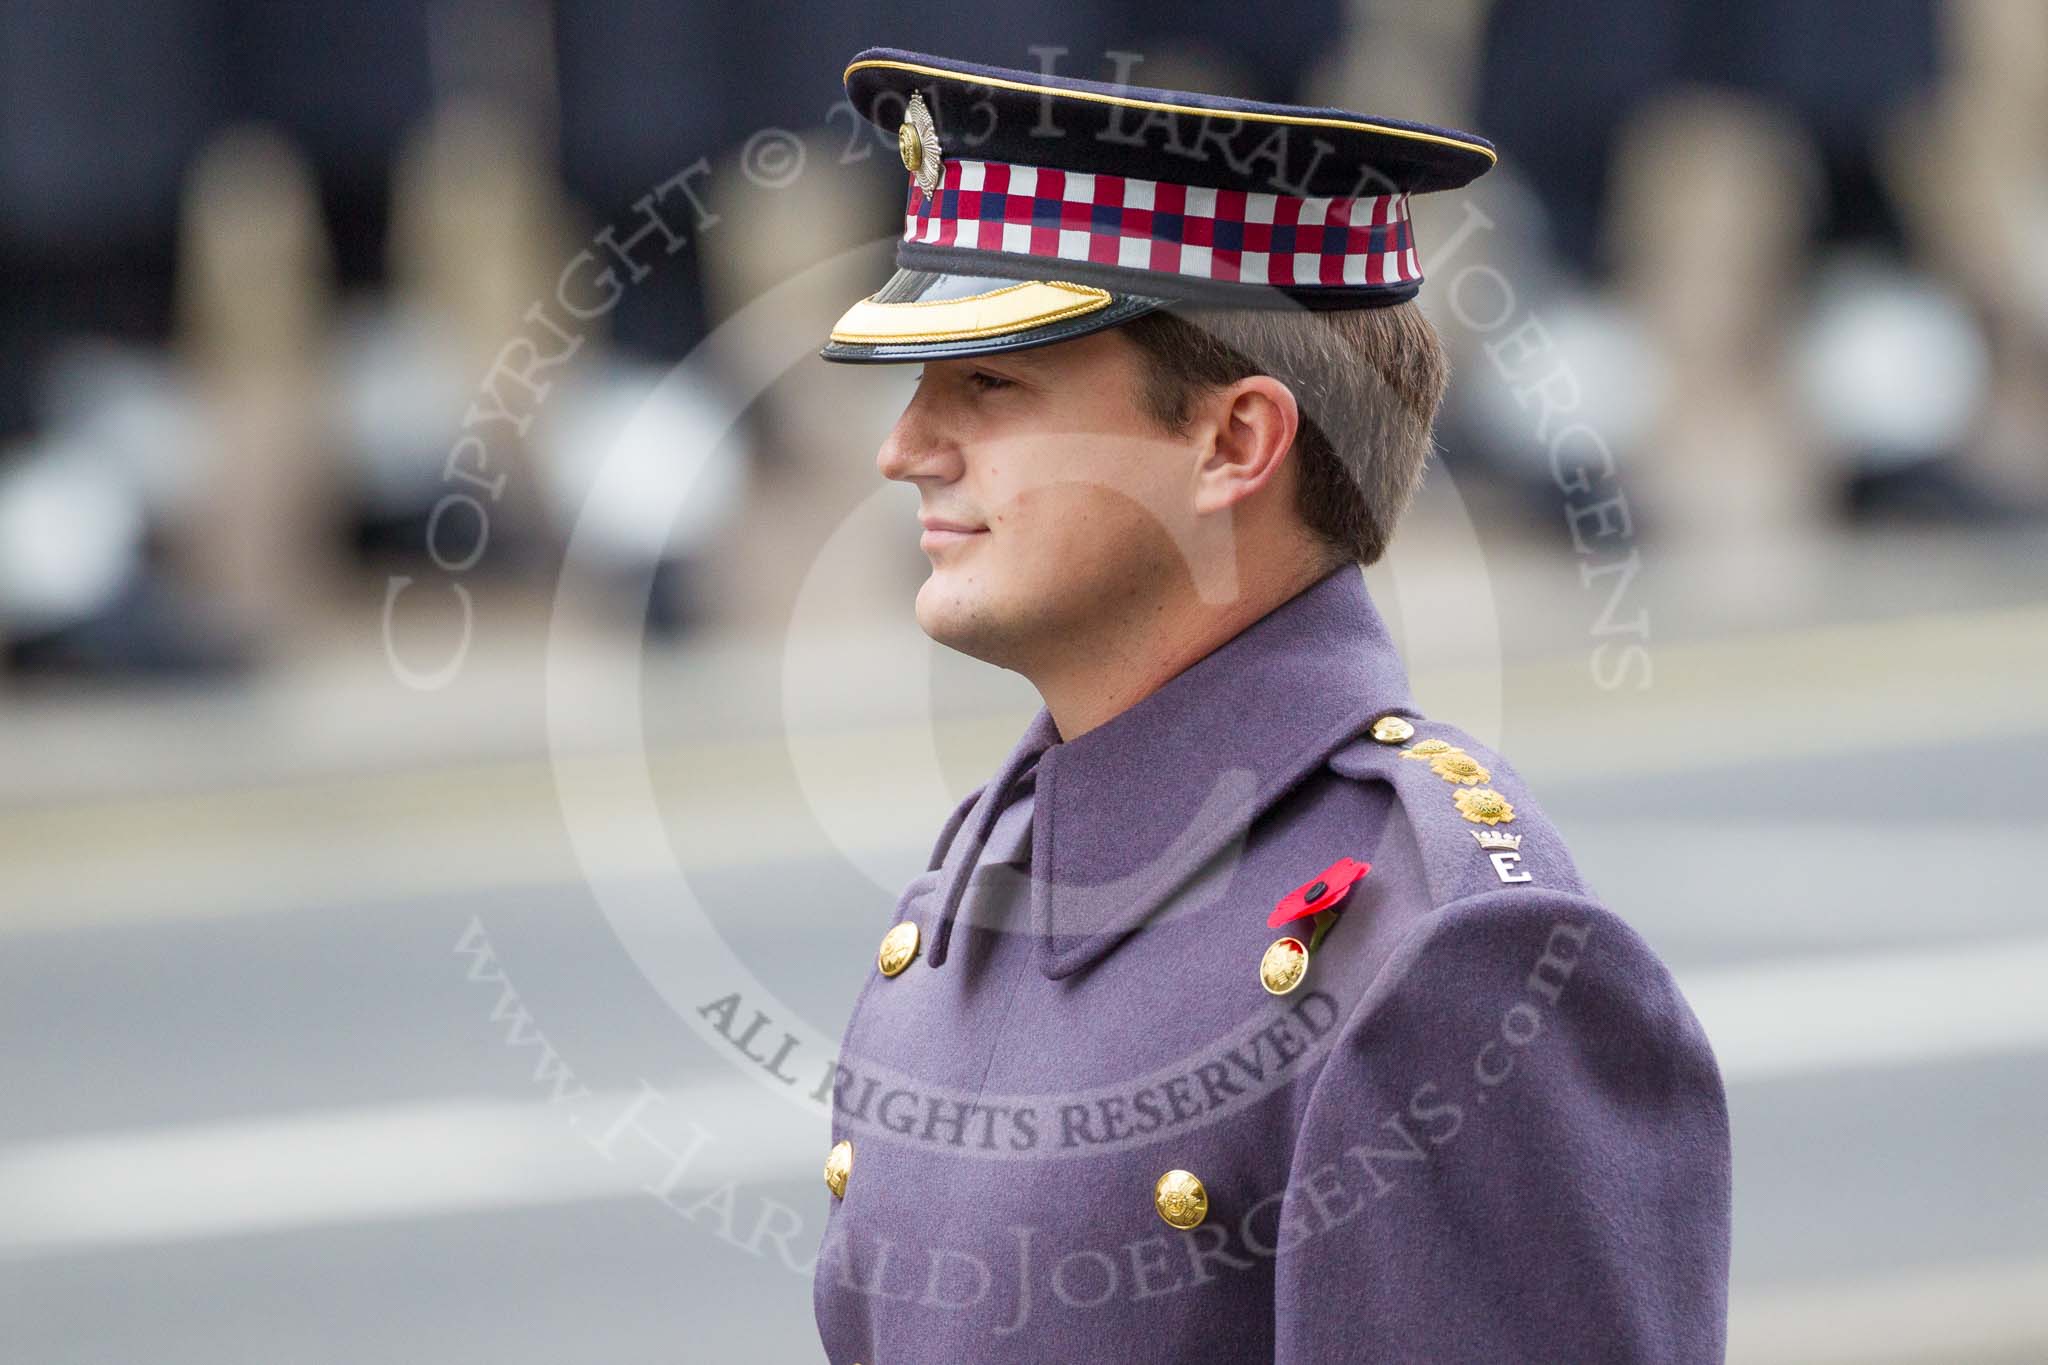 Remembrance Sunday at the Cenotaph 2015: Captain Edward Dalrymple, equerry to the Duke of Kent. Image #276, 08 November 2015 11:14 Whitehall, London, UK